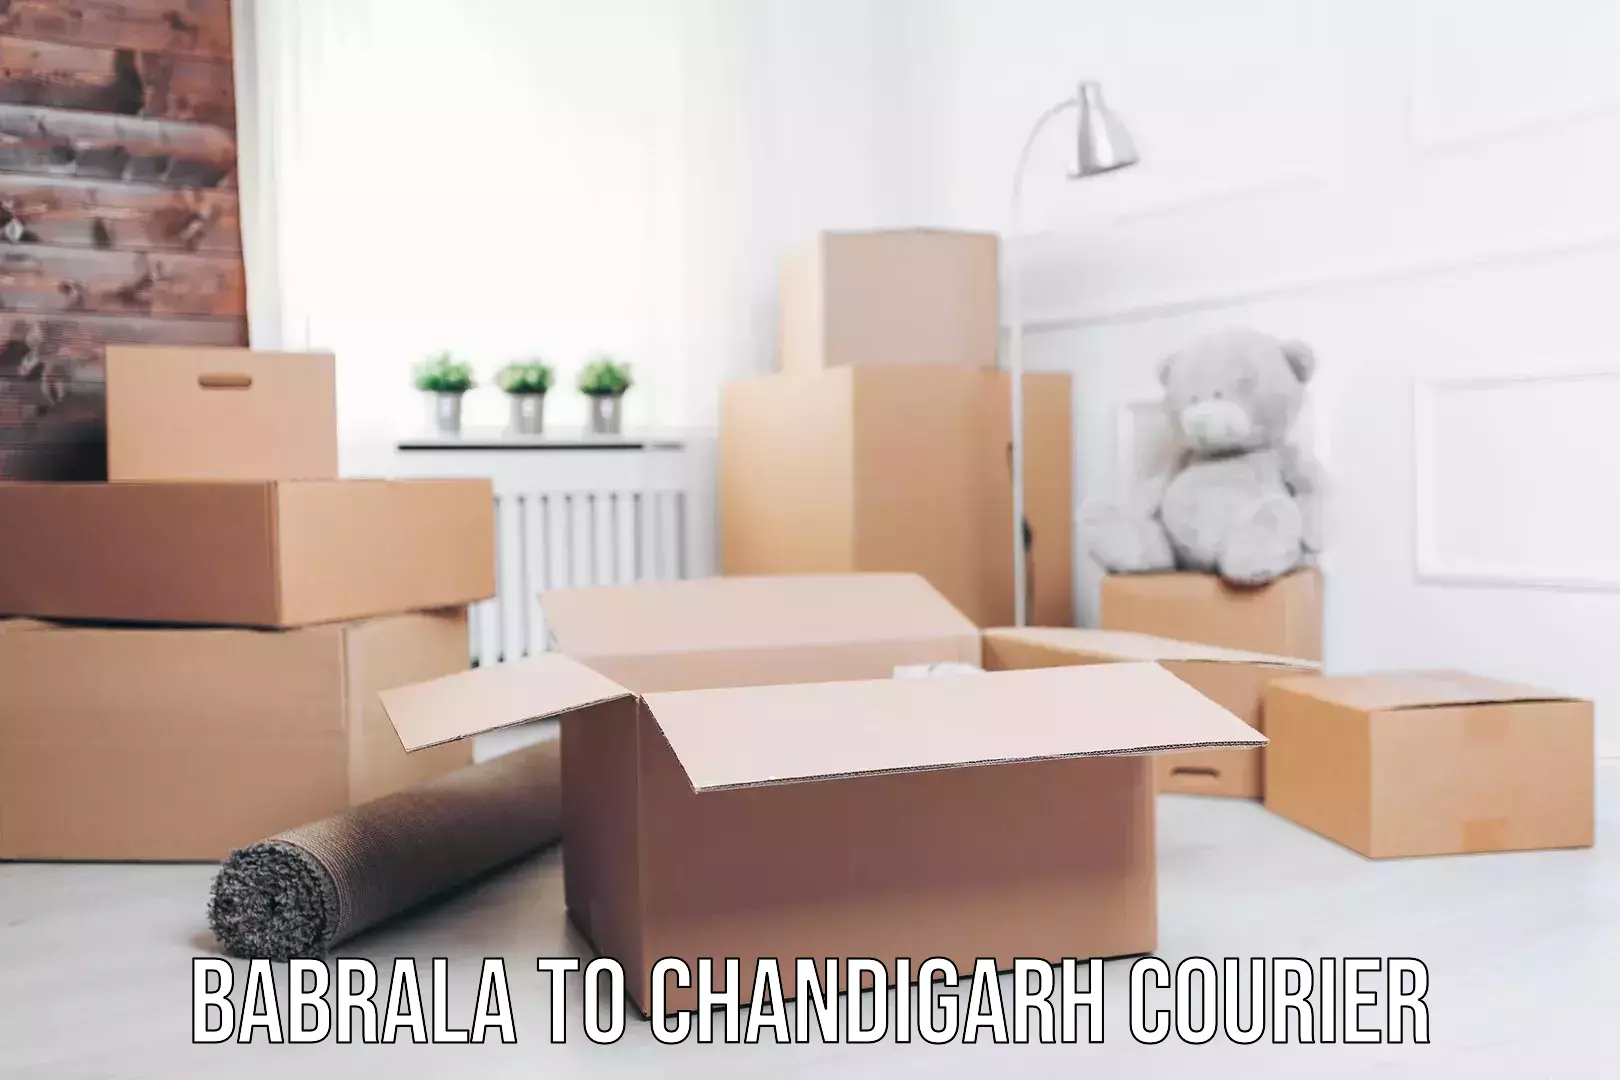 24-hour courier service Babrala to Chandigarh